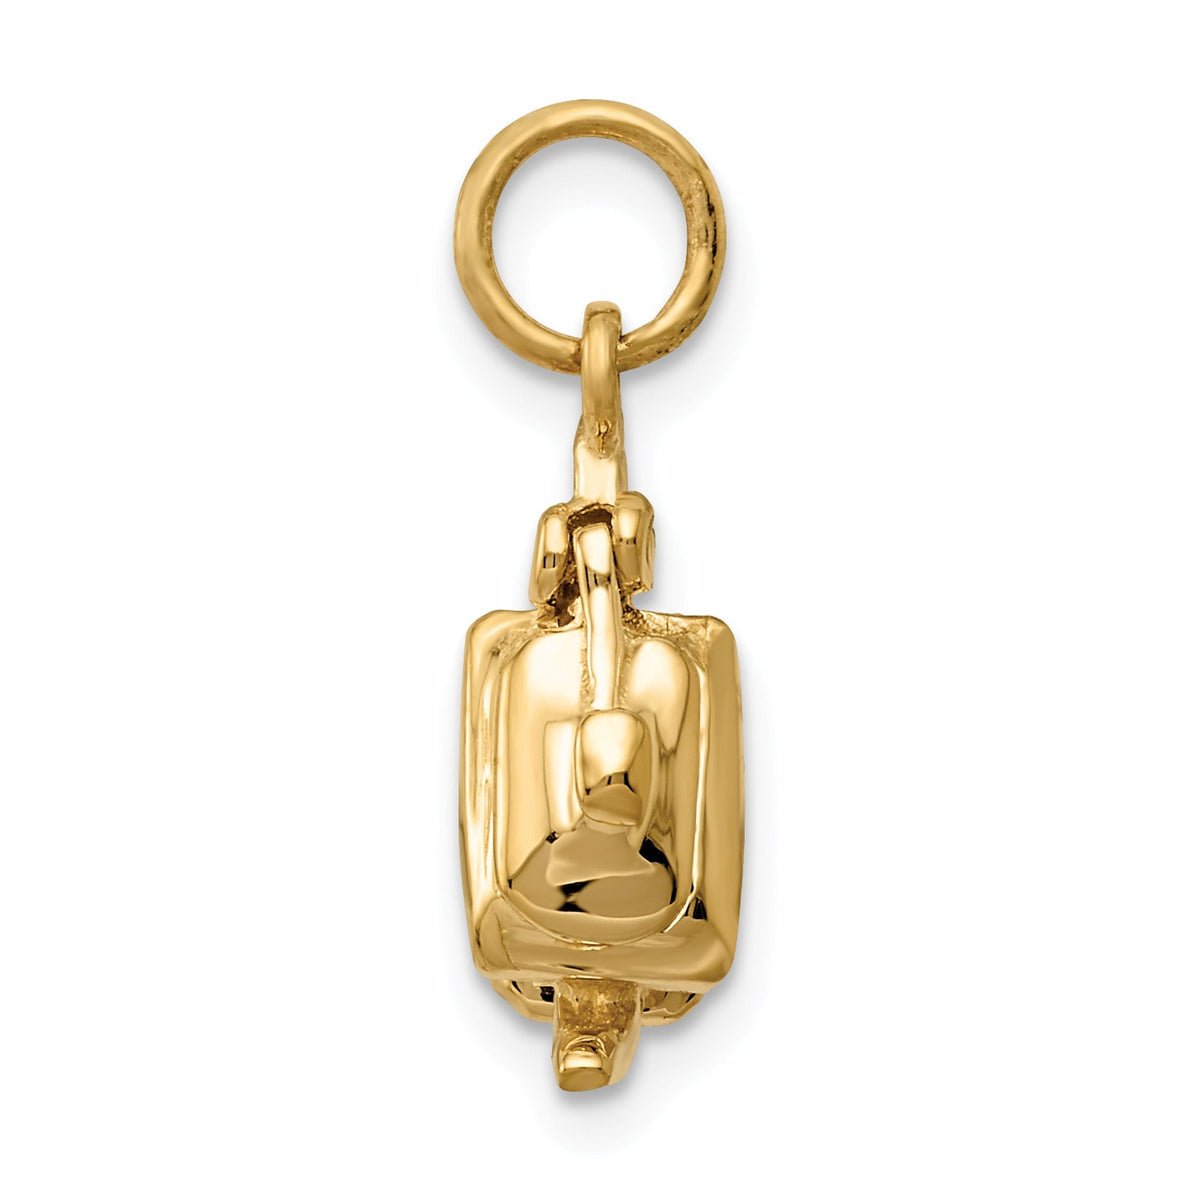 Alternate view of the 14k Yellow Gold 3D Polished Teapot Charm by The Black Bow Jewelry Co.